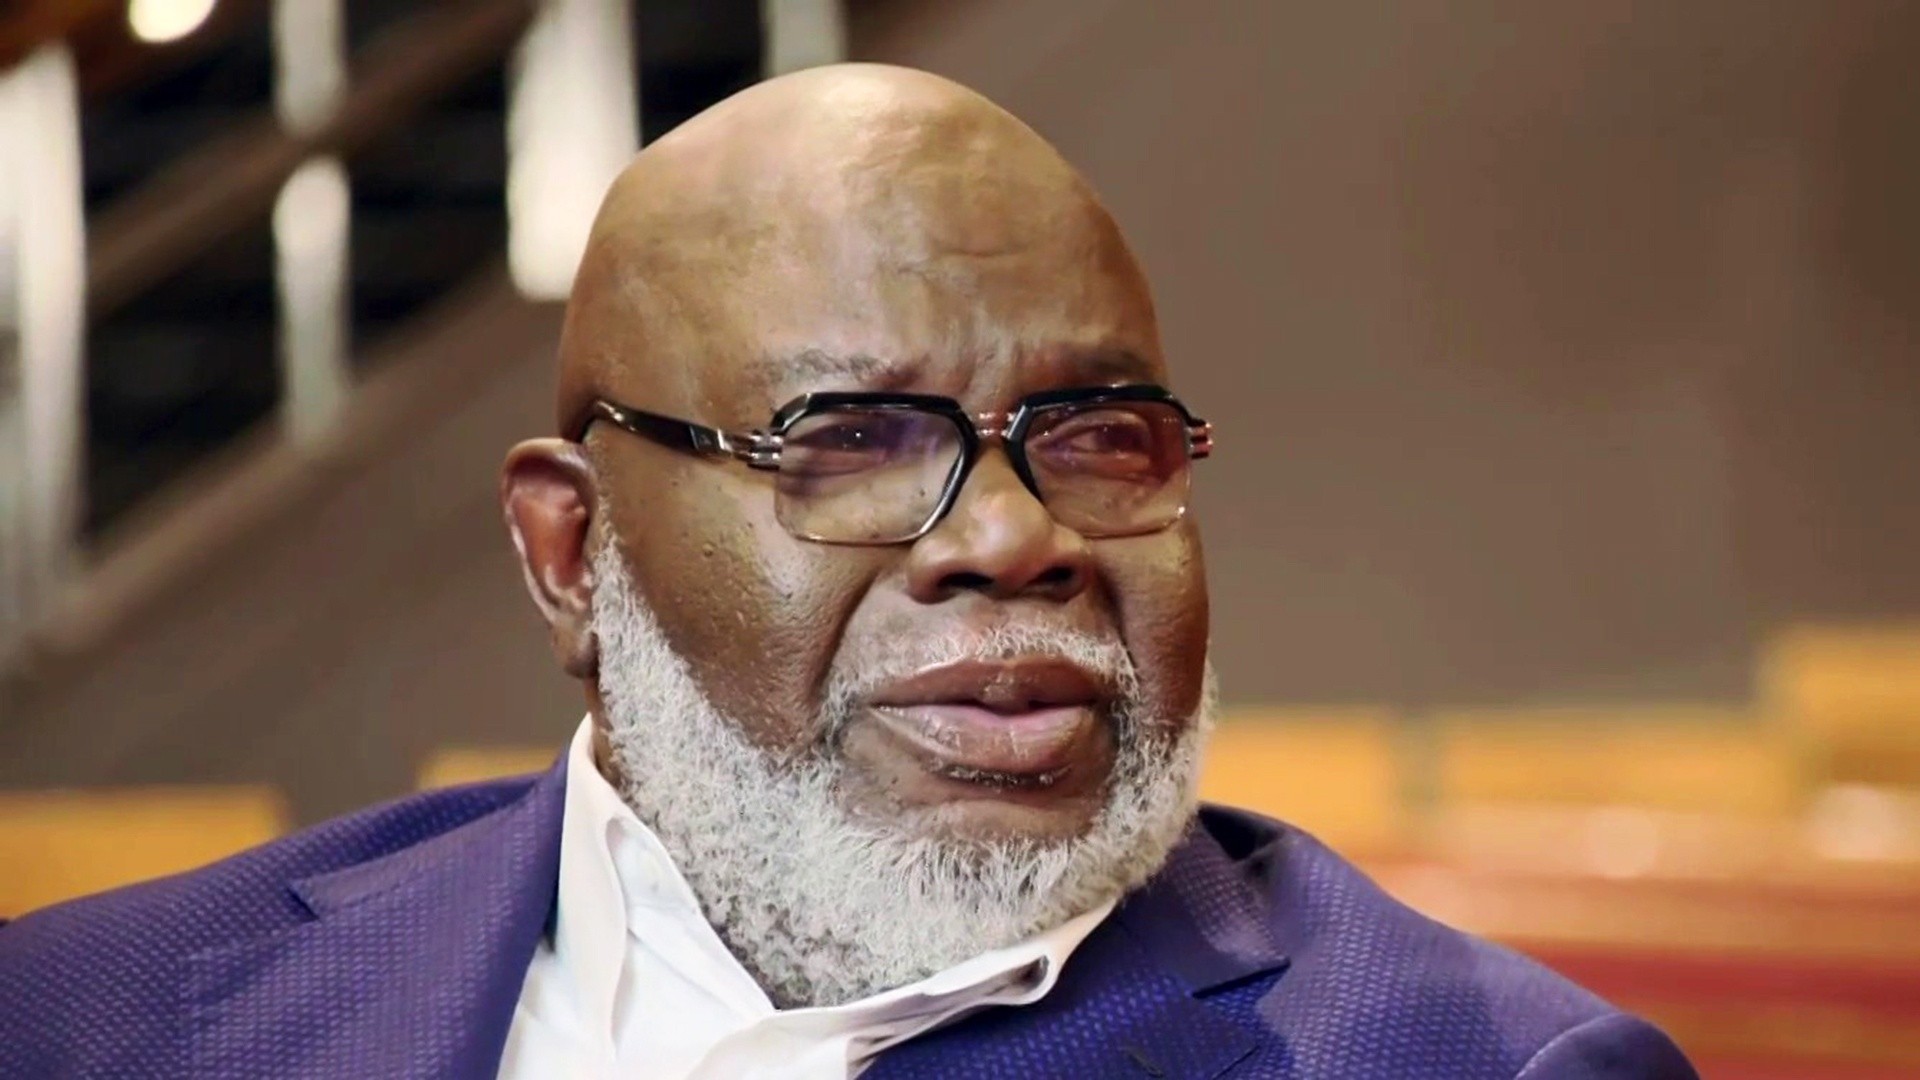 Bishop T D Jakes Talks Faith During Challenging Times